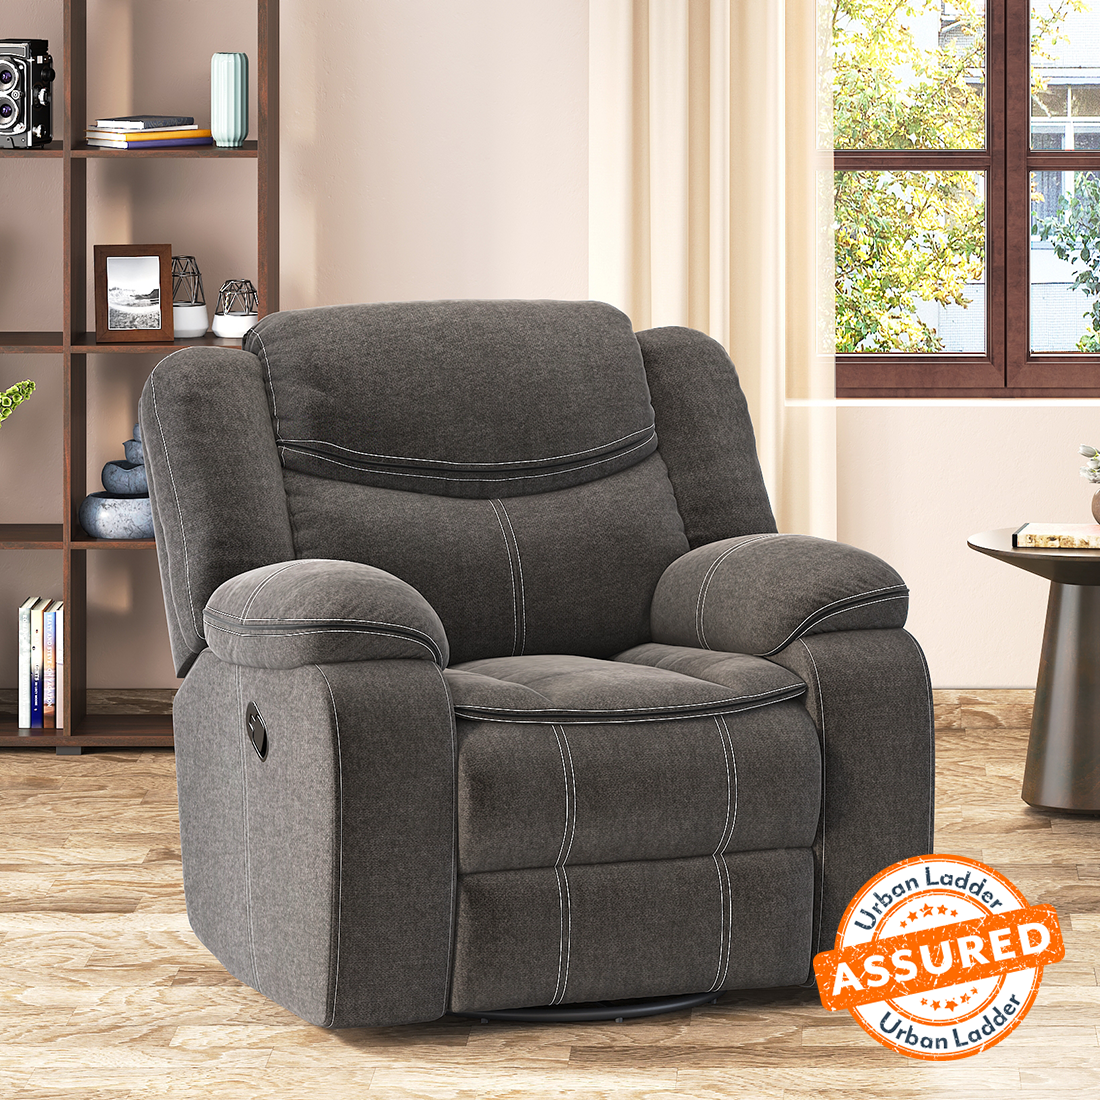 Up to 70% off on Recliners at Color Crush Sale - Urban Ladder